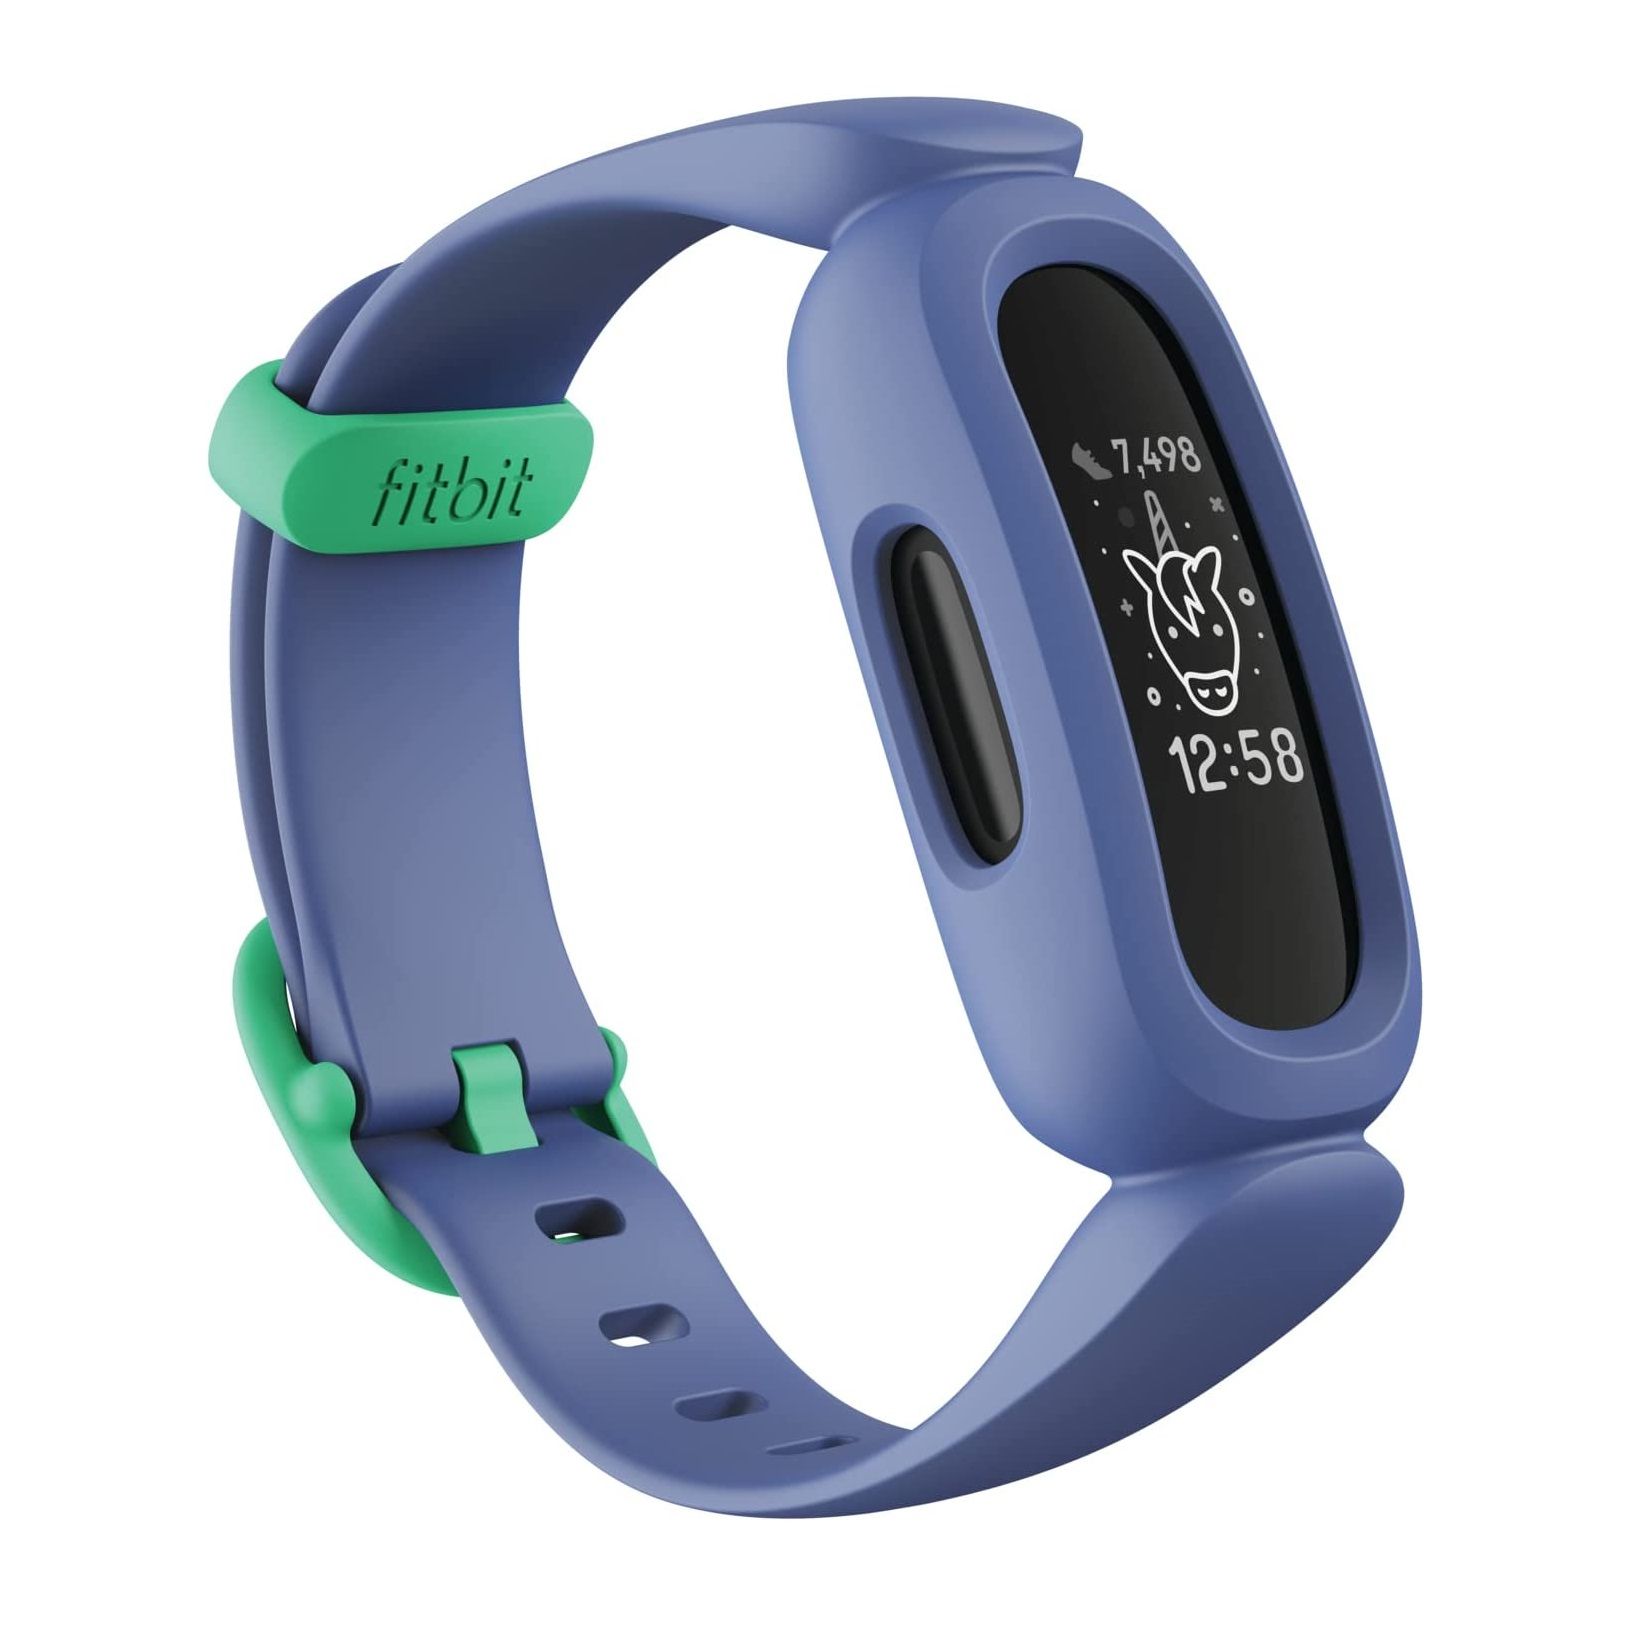 Blue Fitbit Ace 3 fitness tracker on a white background